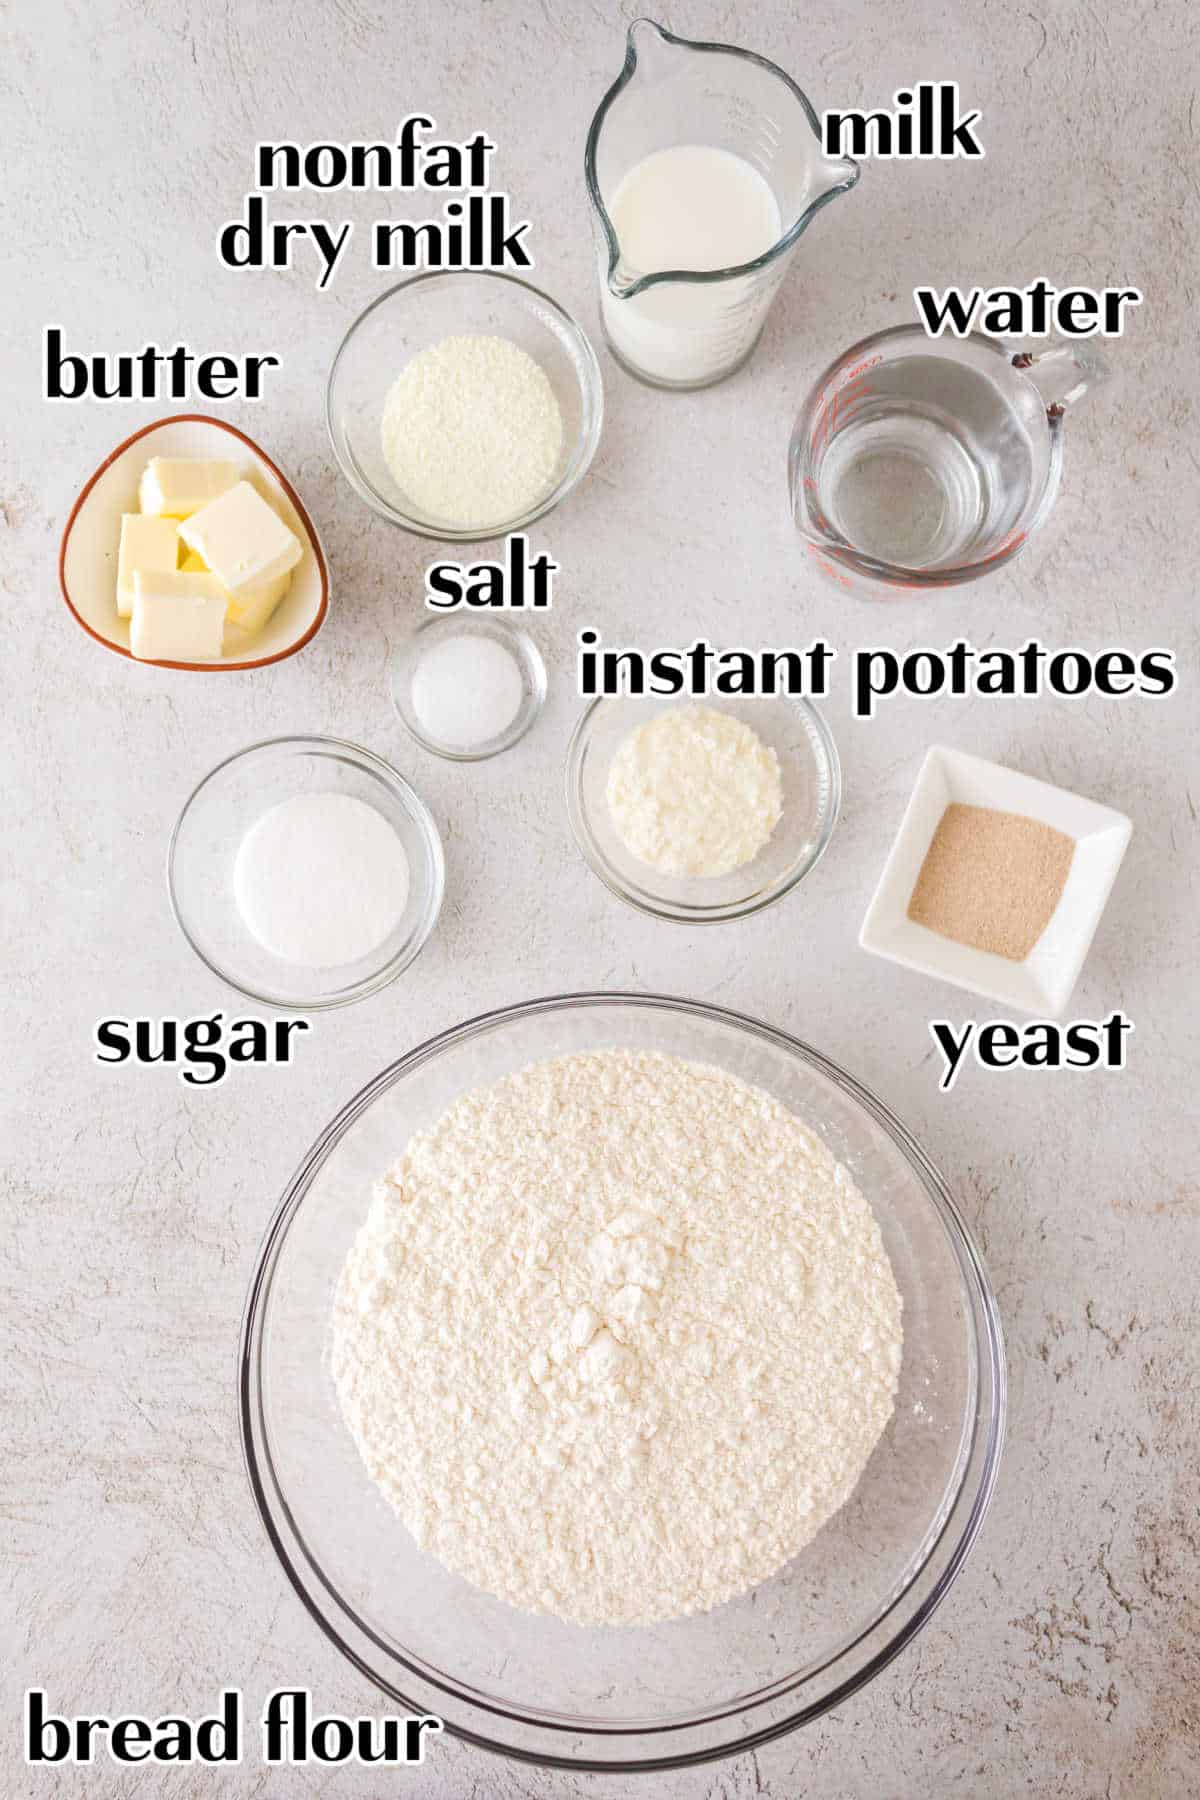 Labeled ingredients for Pullman bread.